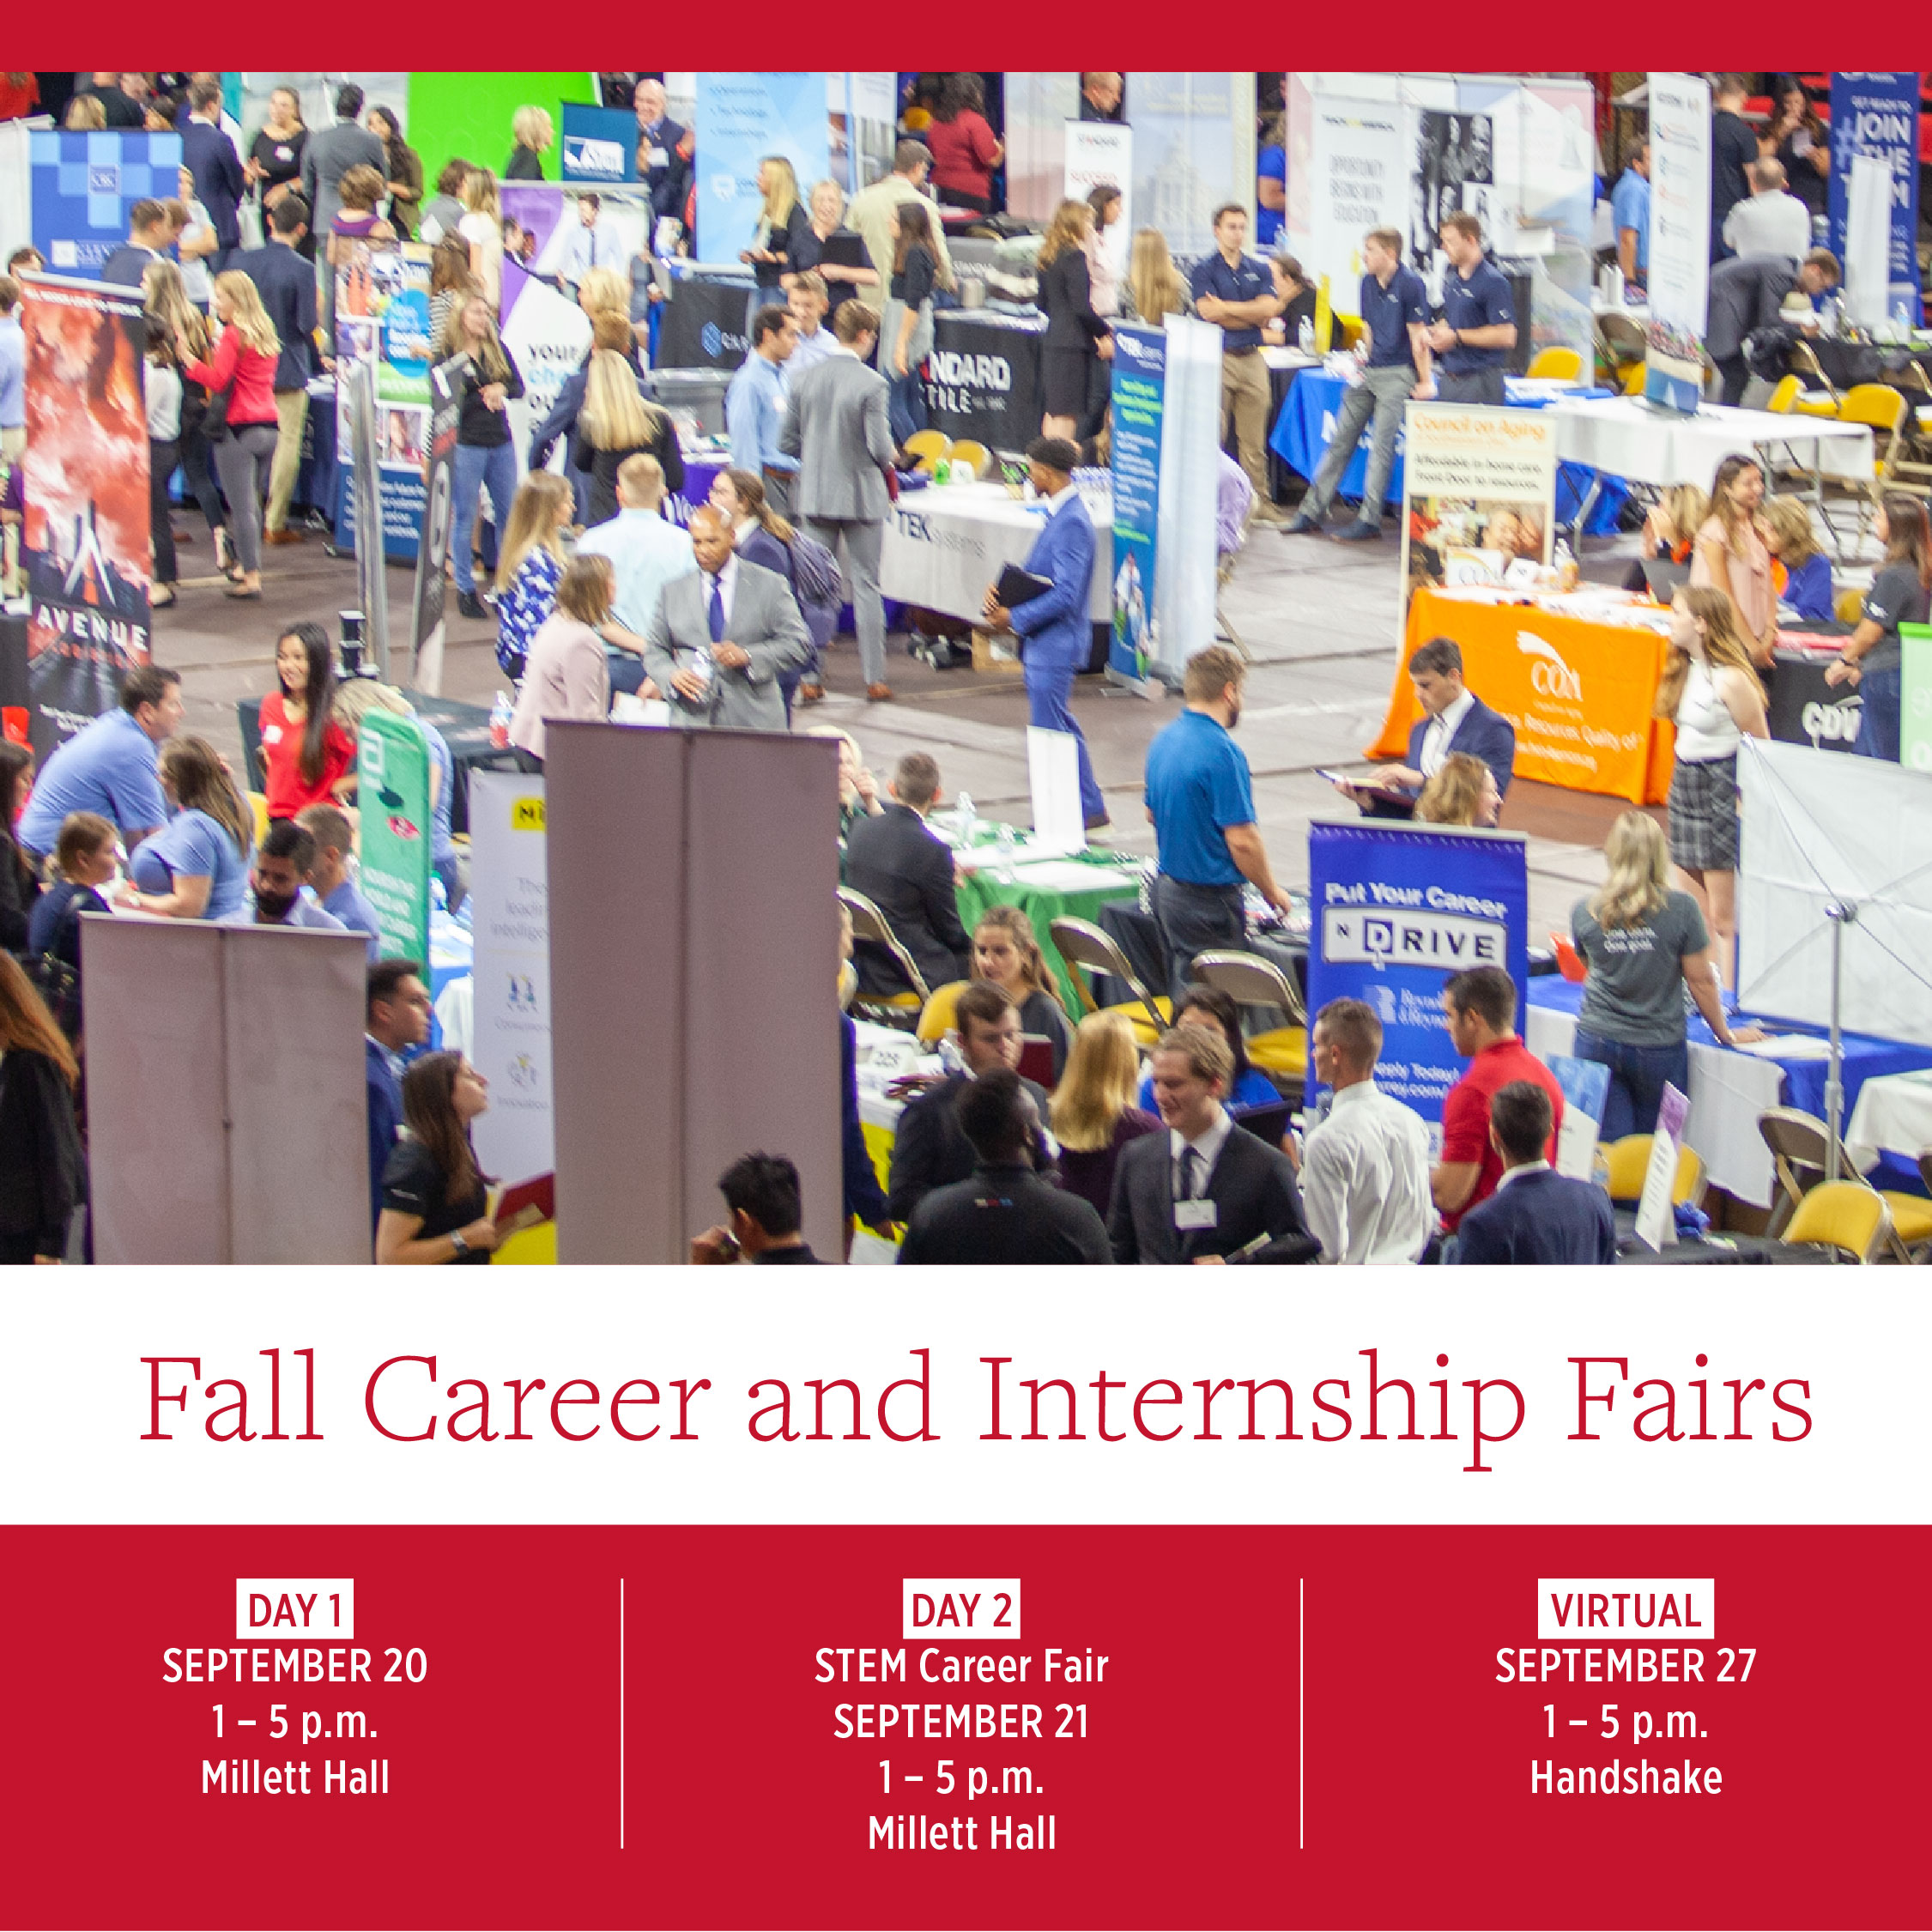  Photo of the Fall Career Fairs held on September 20, 21, and 27